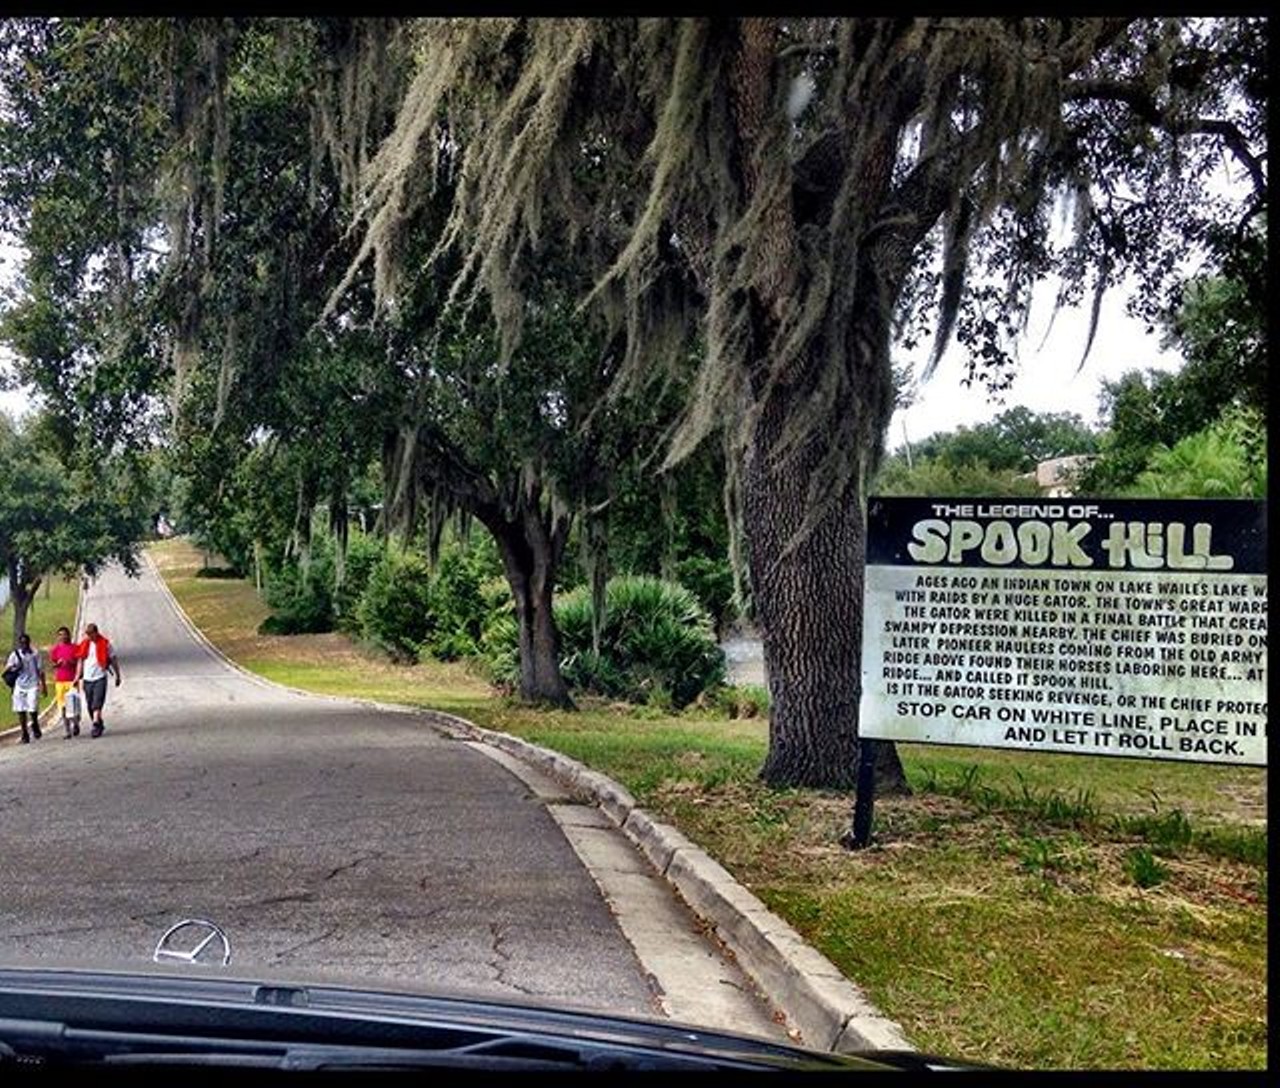 Spook Hill, Lake Wales
N. Wales Drive, Lake Wales
Let your car defy gravity and roll uphill at this creepy roadside phenomenon in Lake Wales.
Photo via pirate330s on Instagram